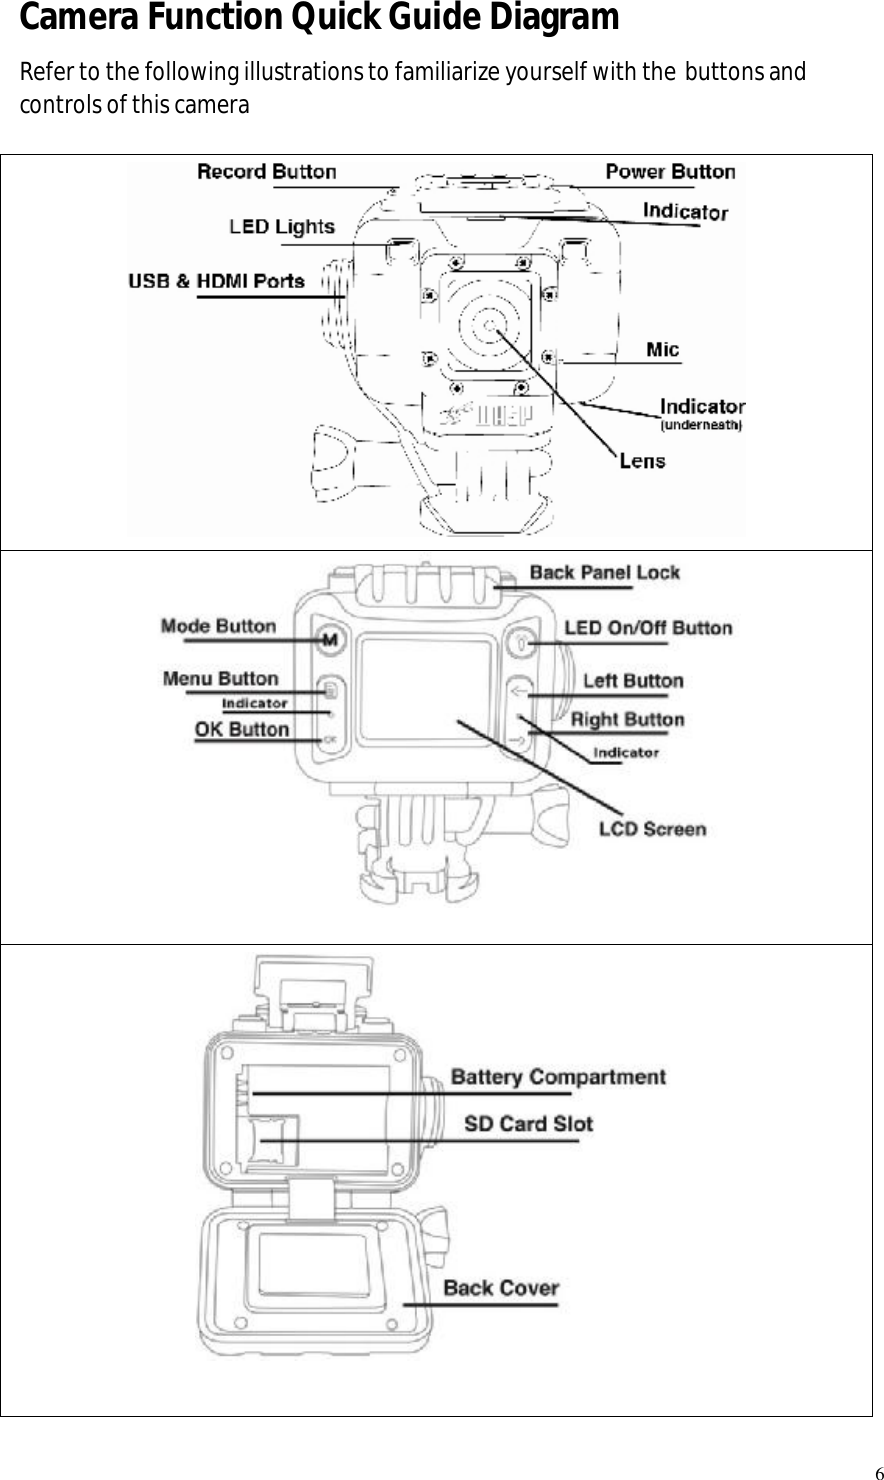   6 Camera Function Quick Guide Diagram  Refer to the following illustrations to familiarize yourself with the buttons and controls of this camera     